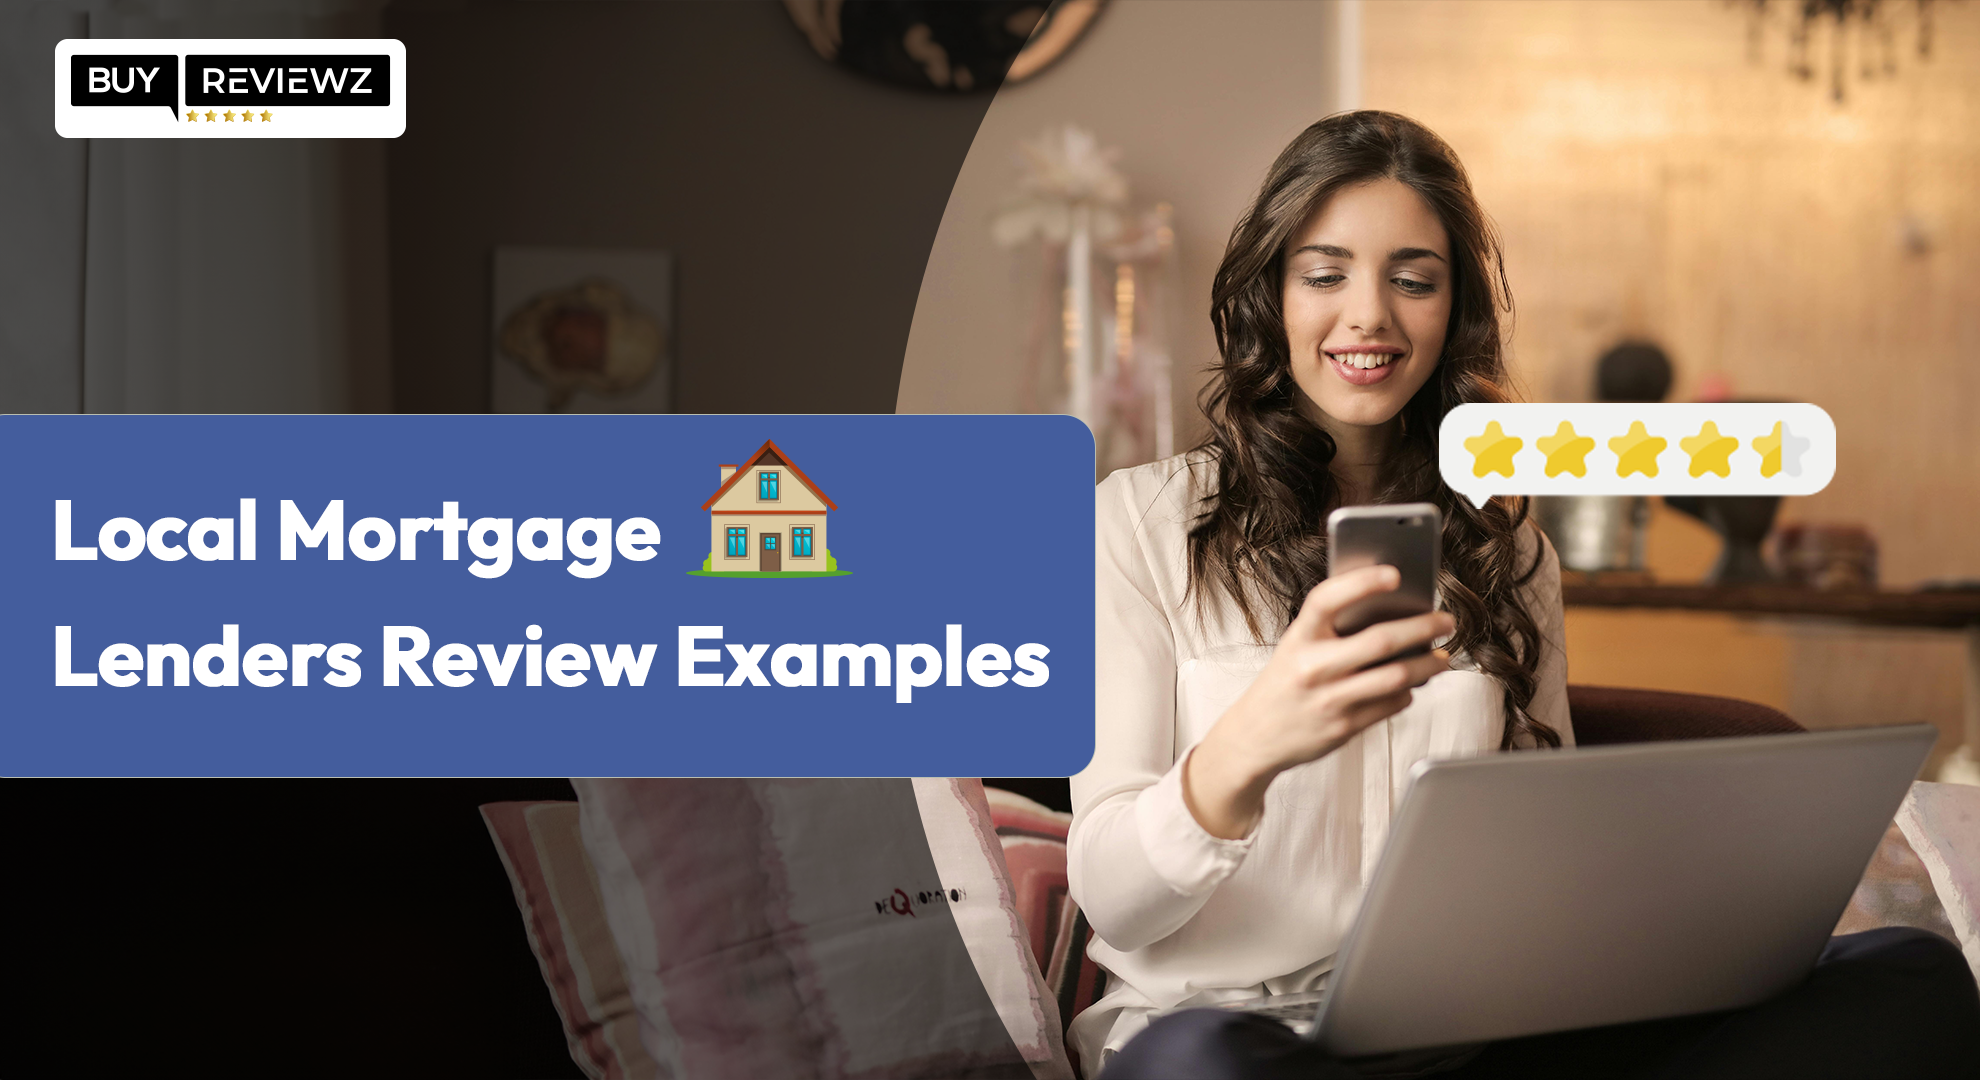 Local Mortgage Lenders Review Examples